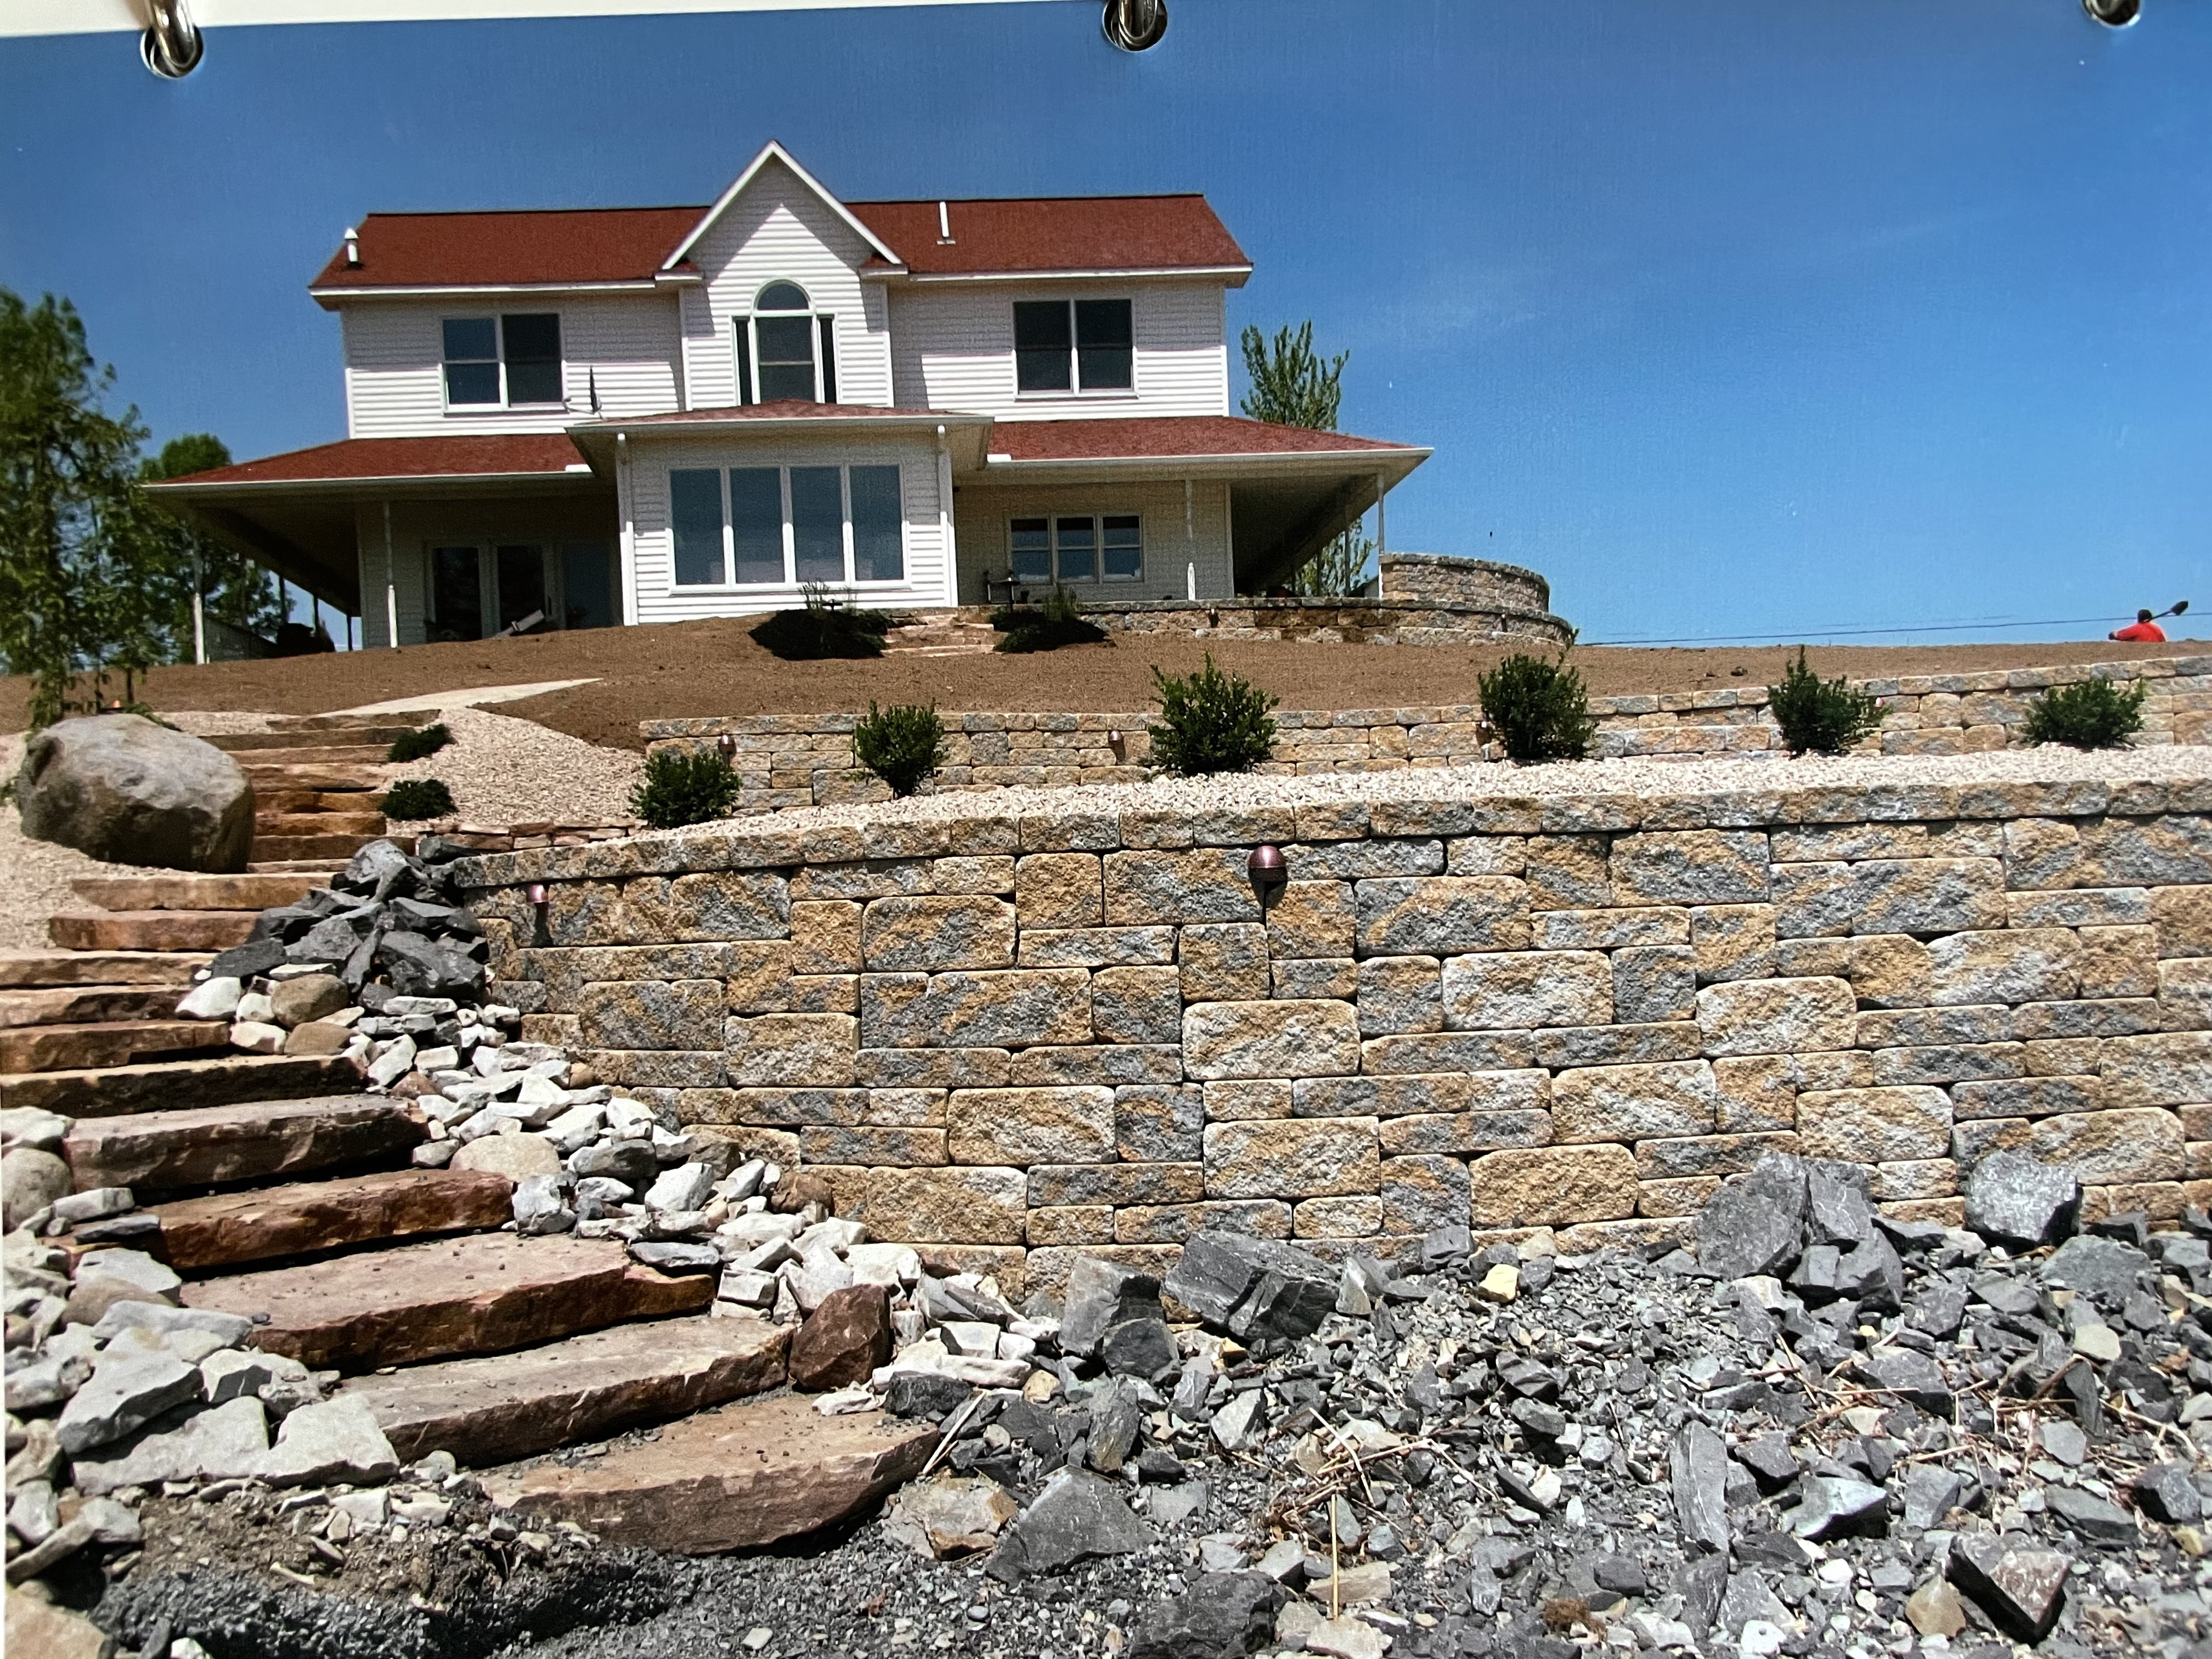 Terraced Retaining Walls with Sandstone Stairs